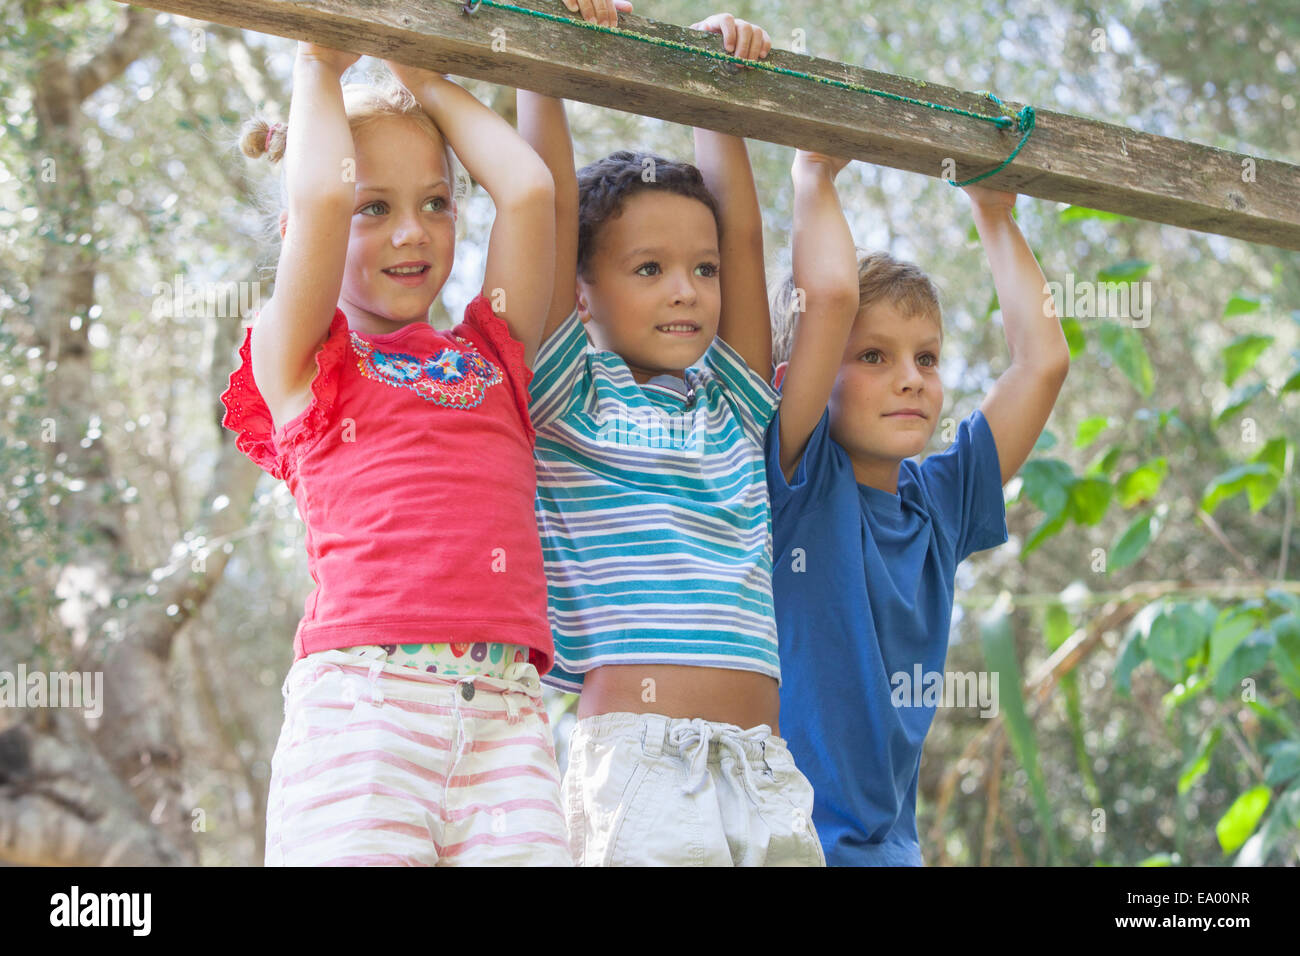 Three children holding onto fence looking away Stock Photo